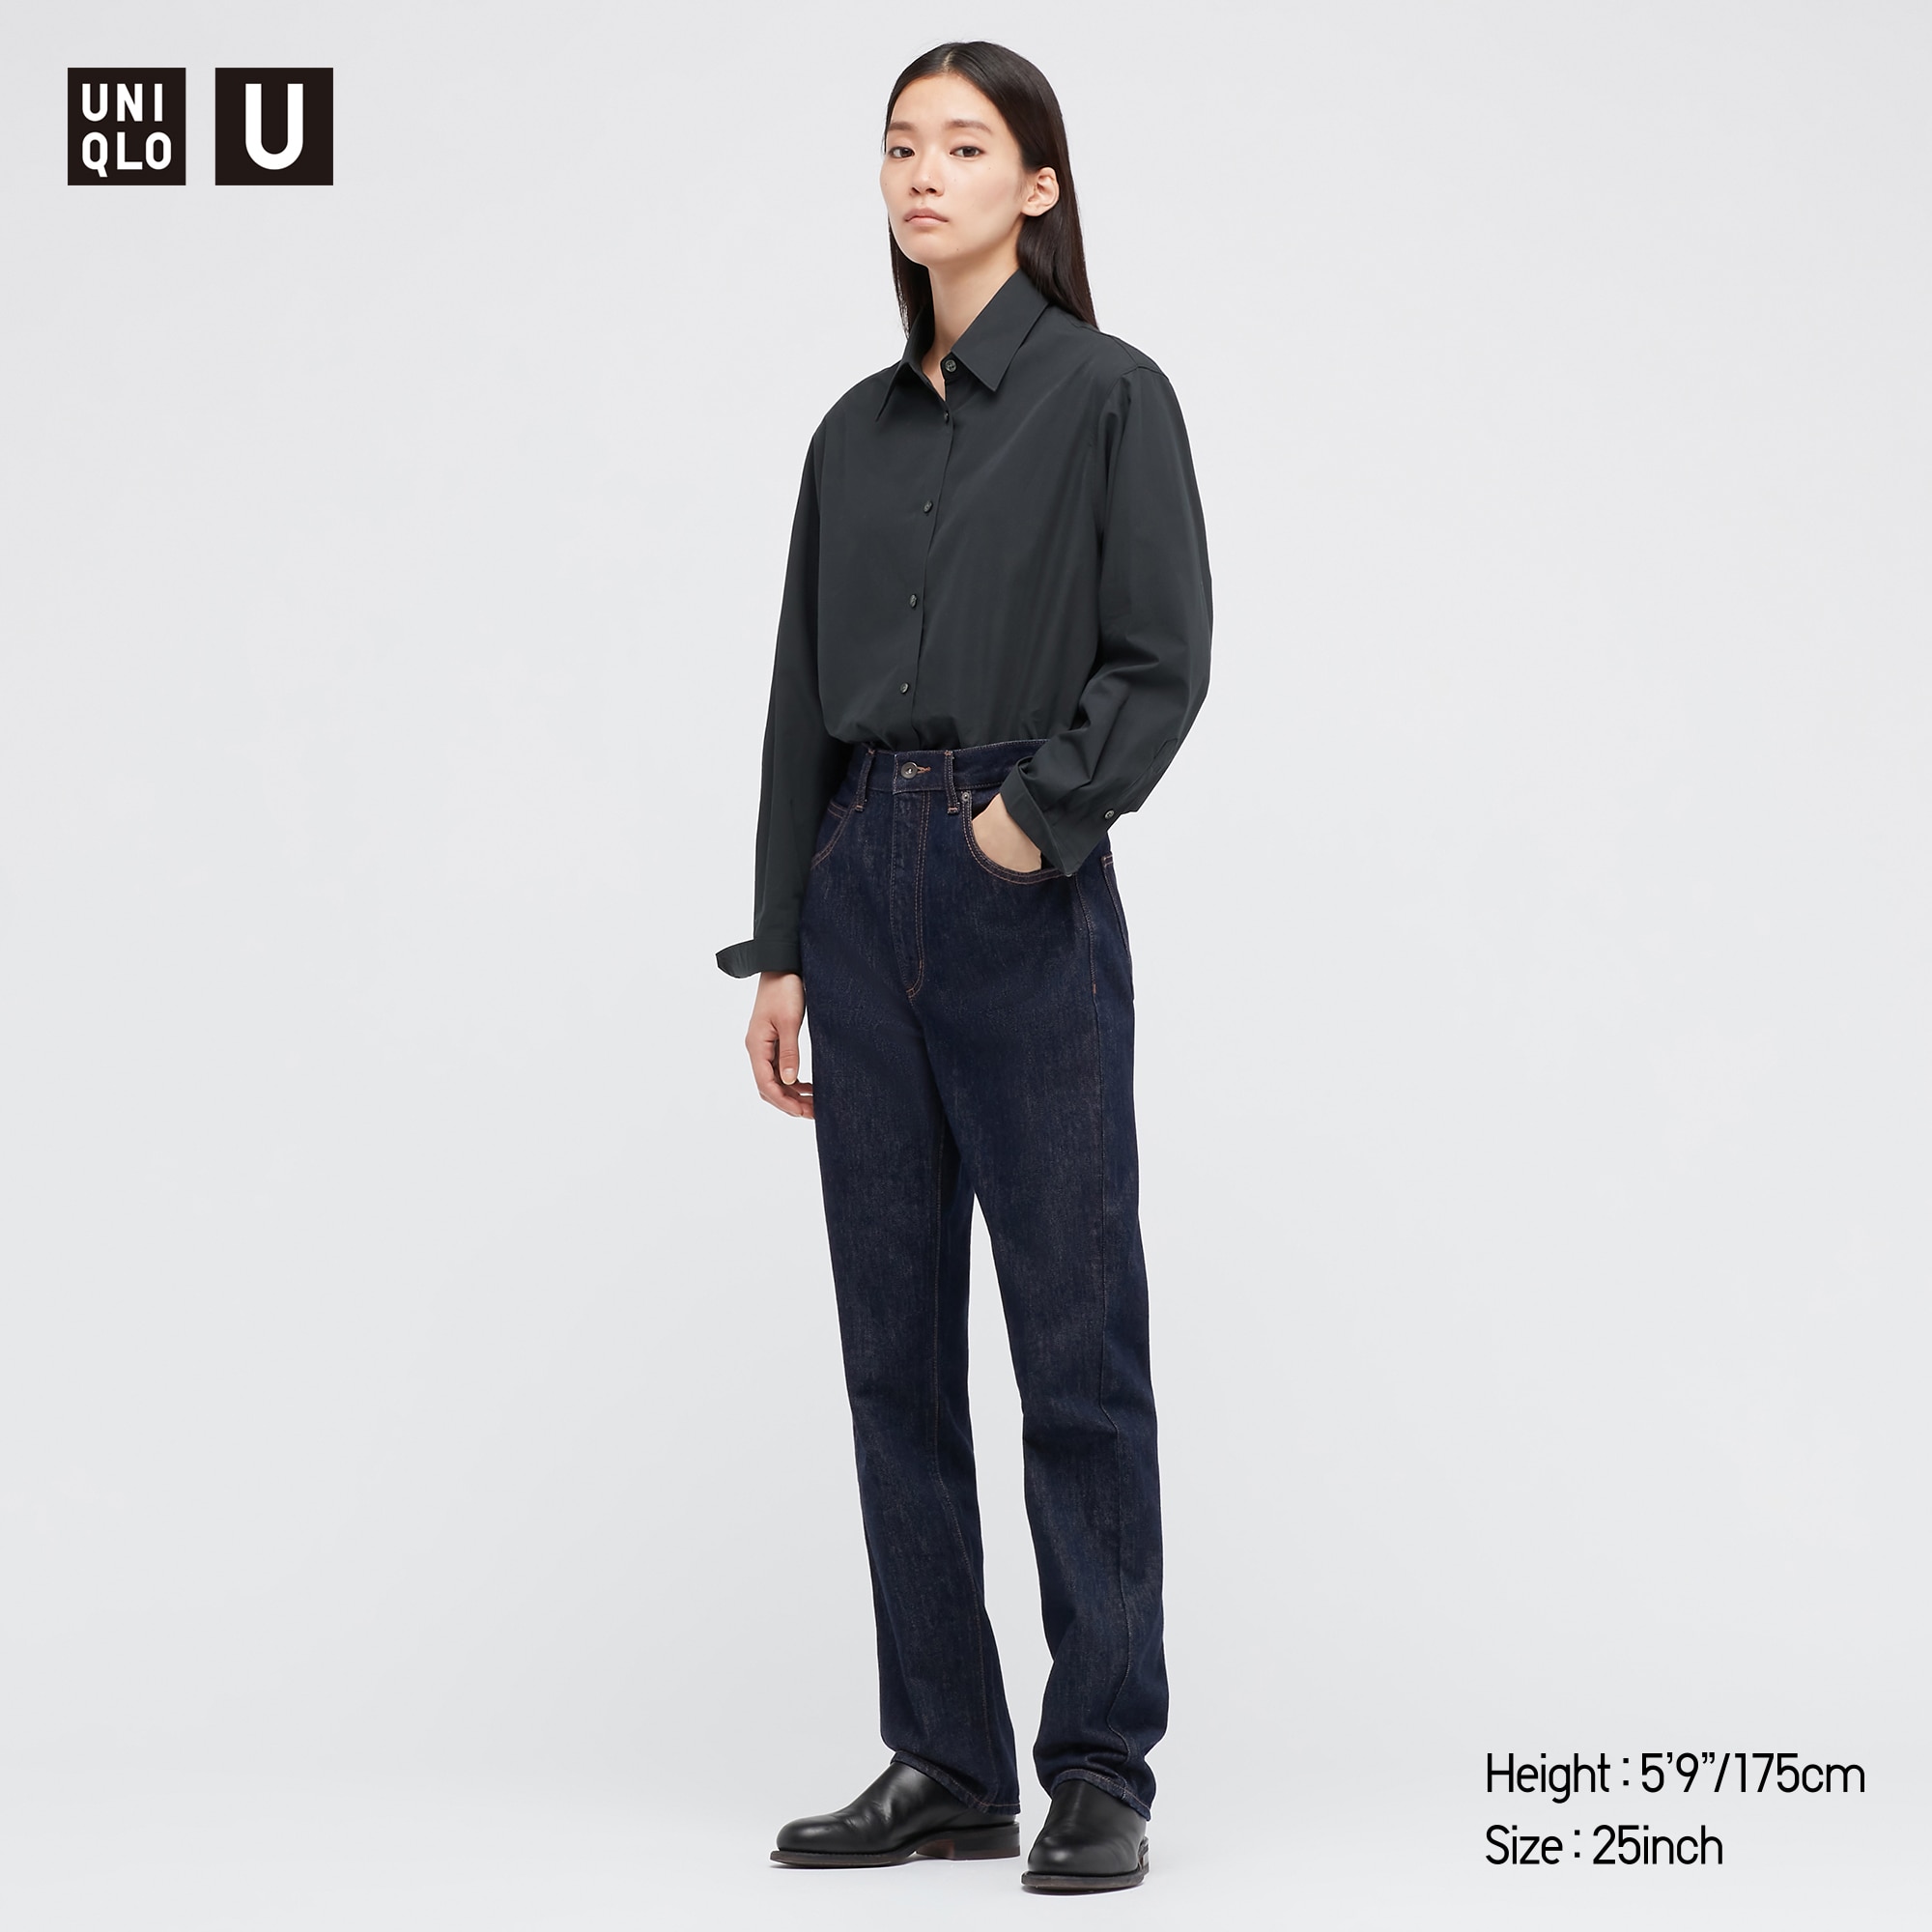 UNIQLO Baggy Jeans | StyleHint